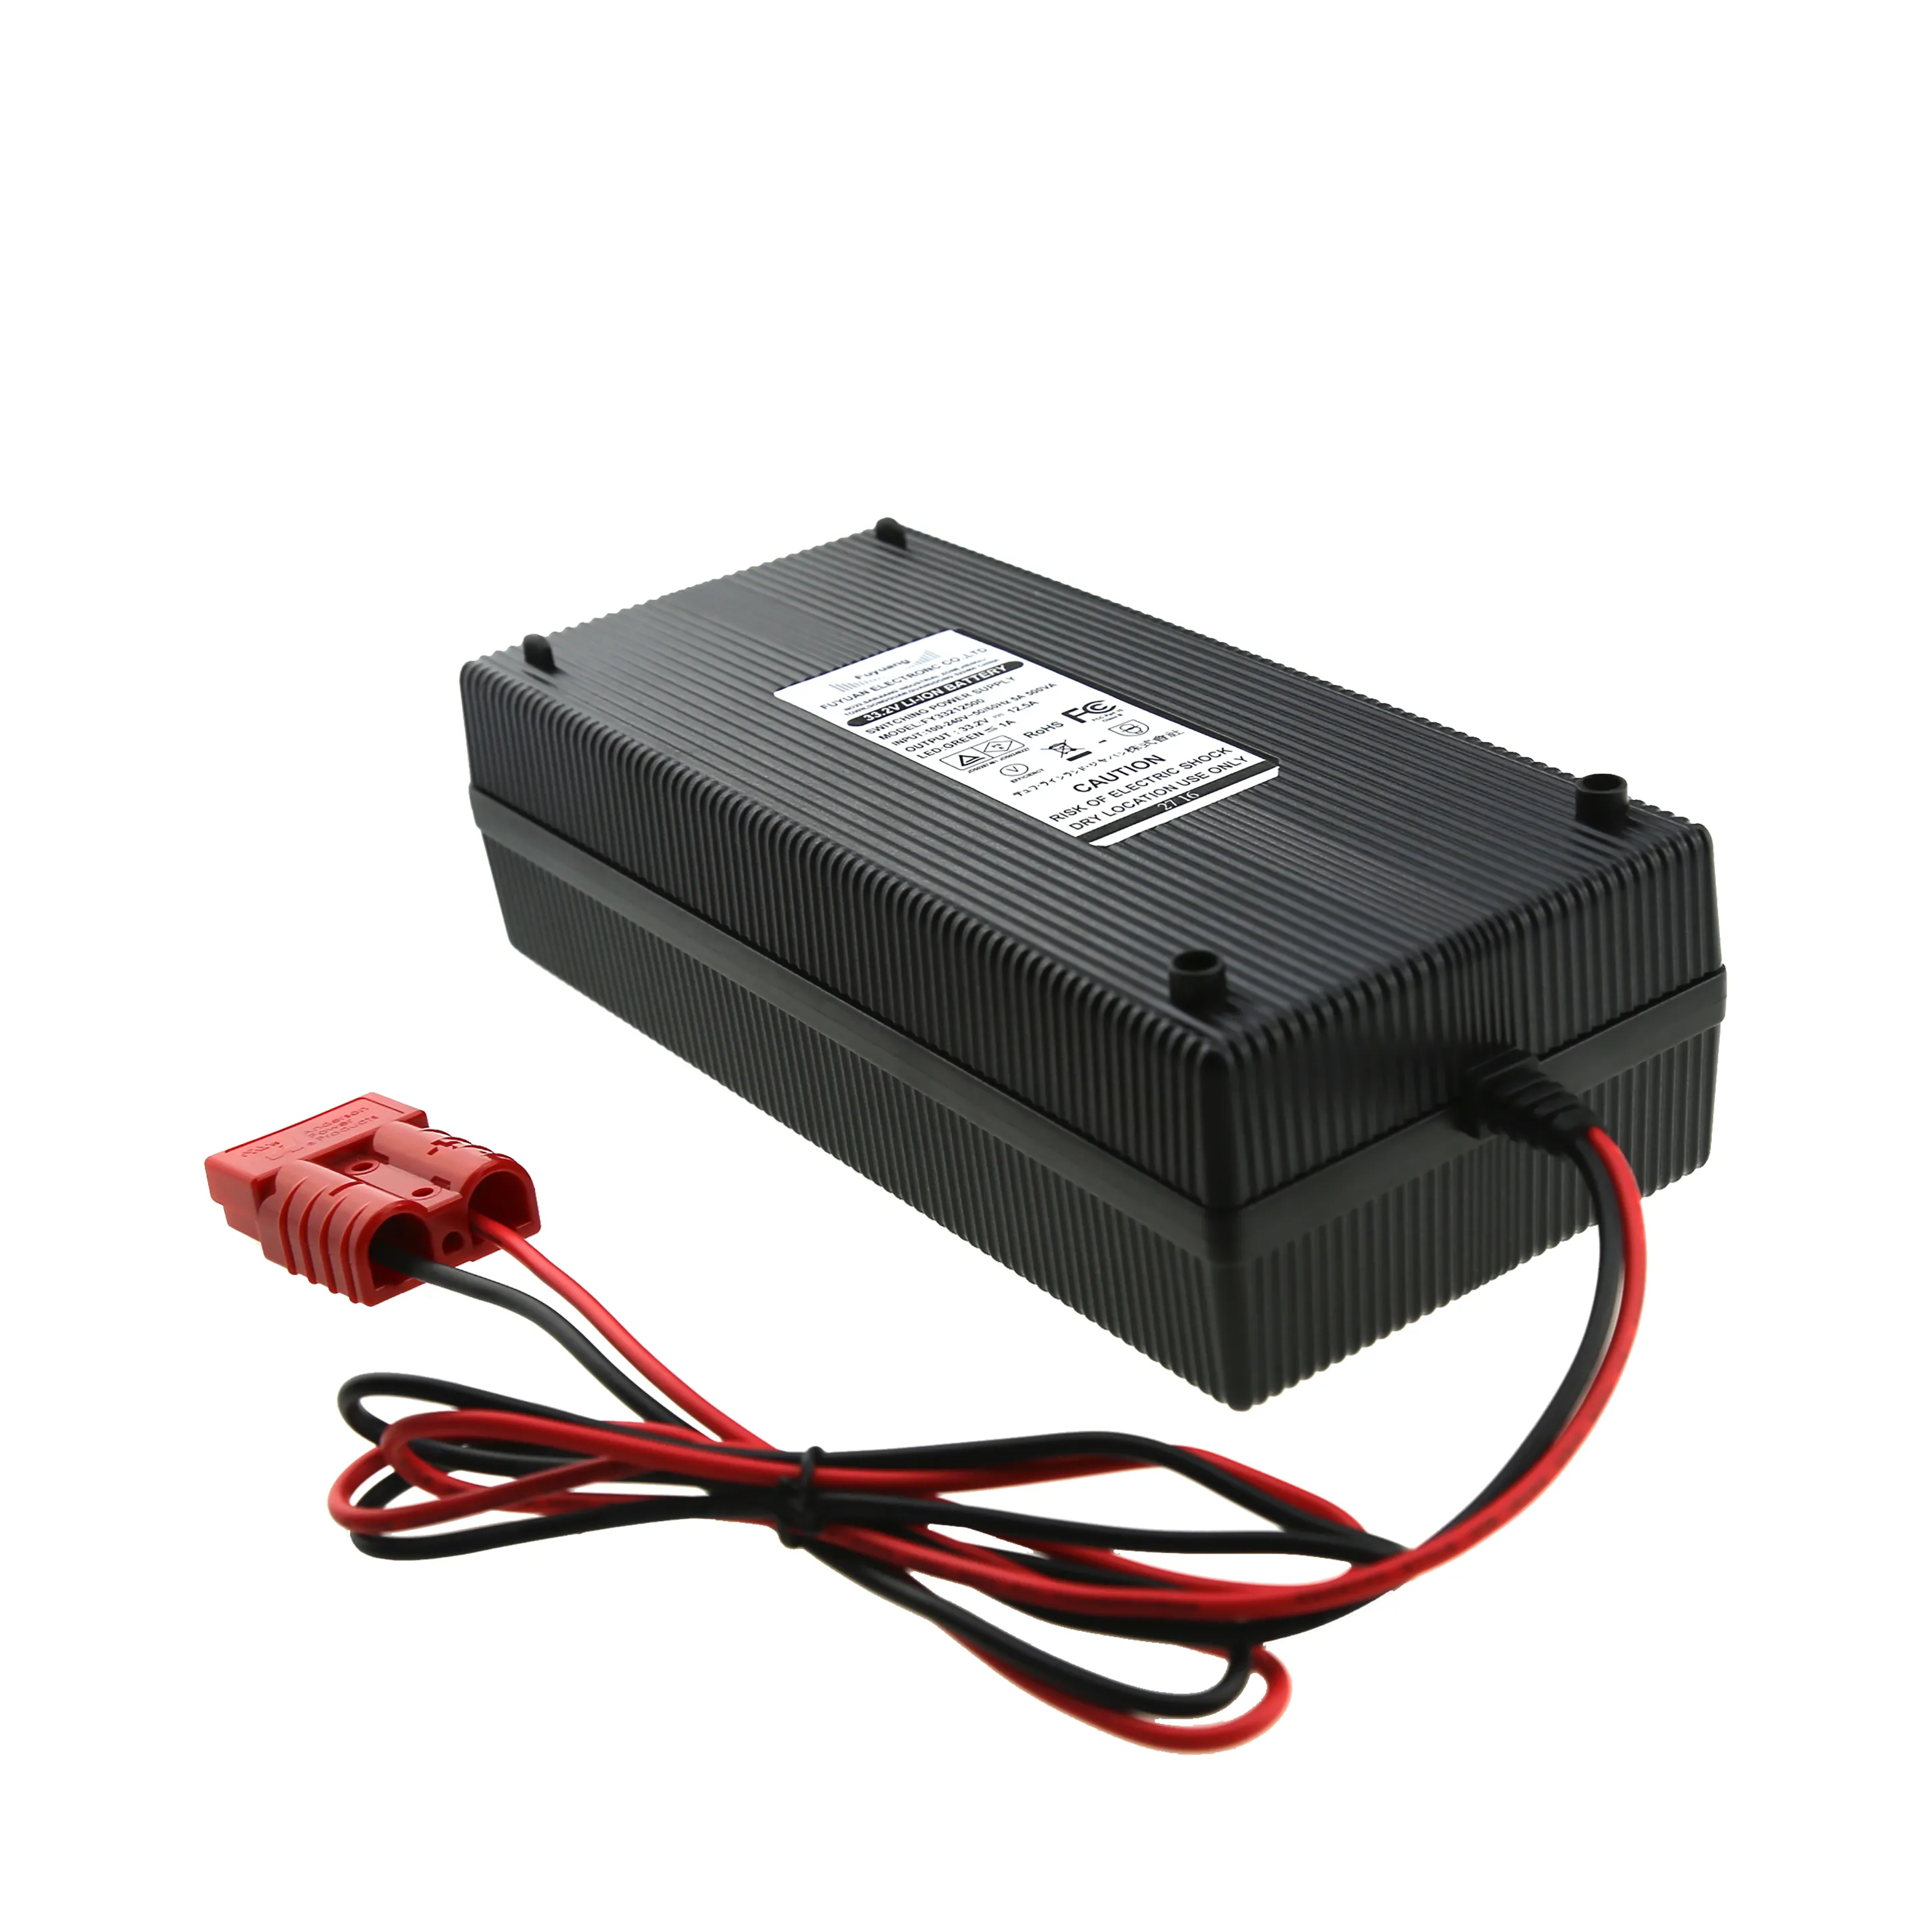 67.2V 5A 6A Lithium Ion Battery Charger For Ebike Scooter Balance Wheel Motorcycle